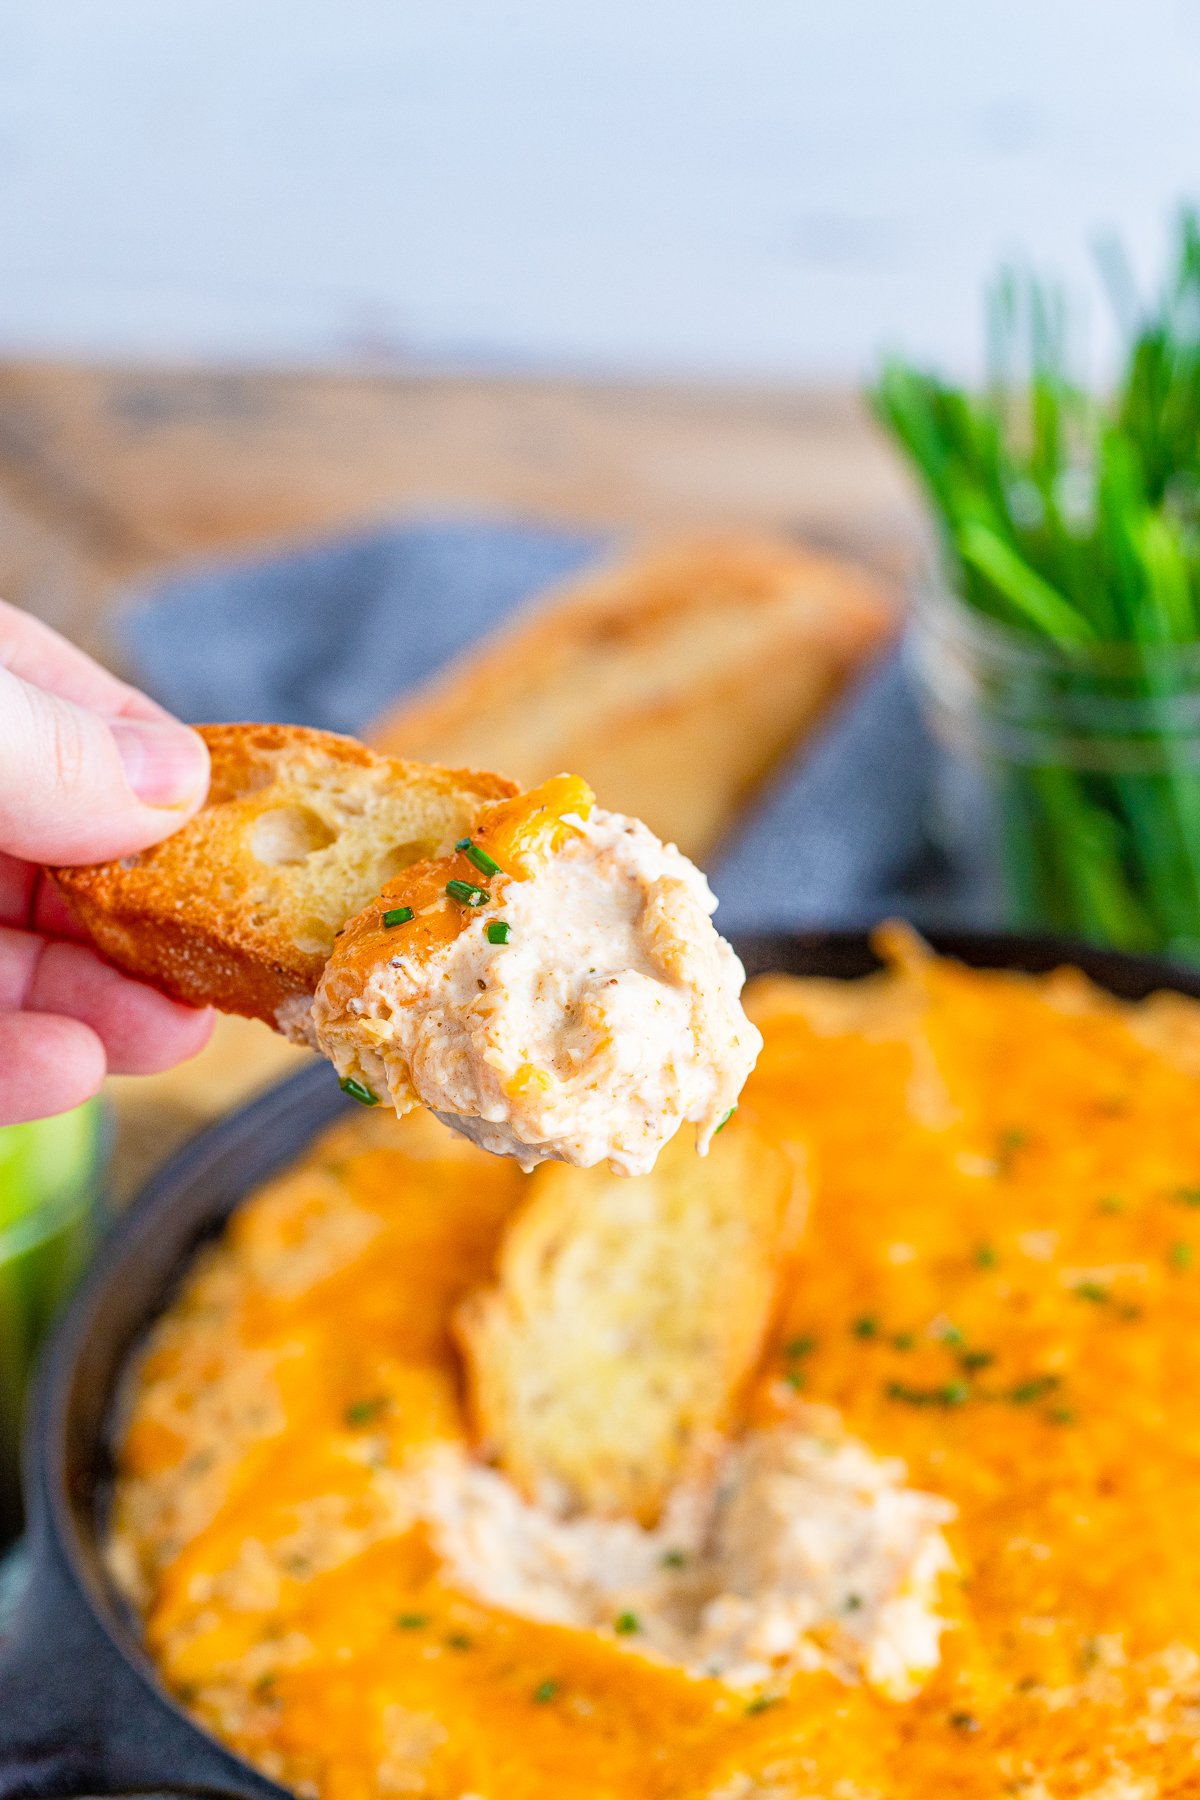 Hand holding up a piece of bread with some Smoked Crab Dip Recipe on it.